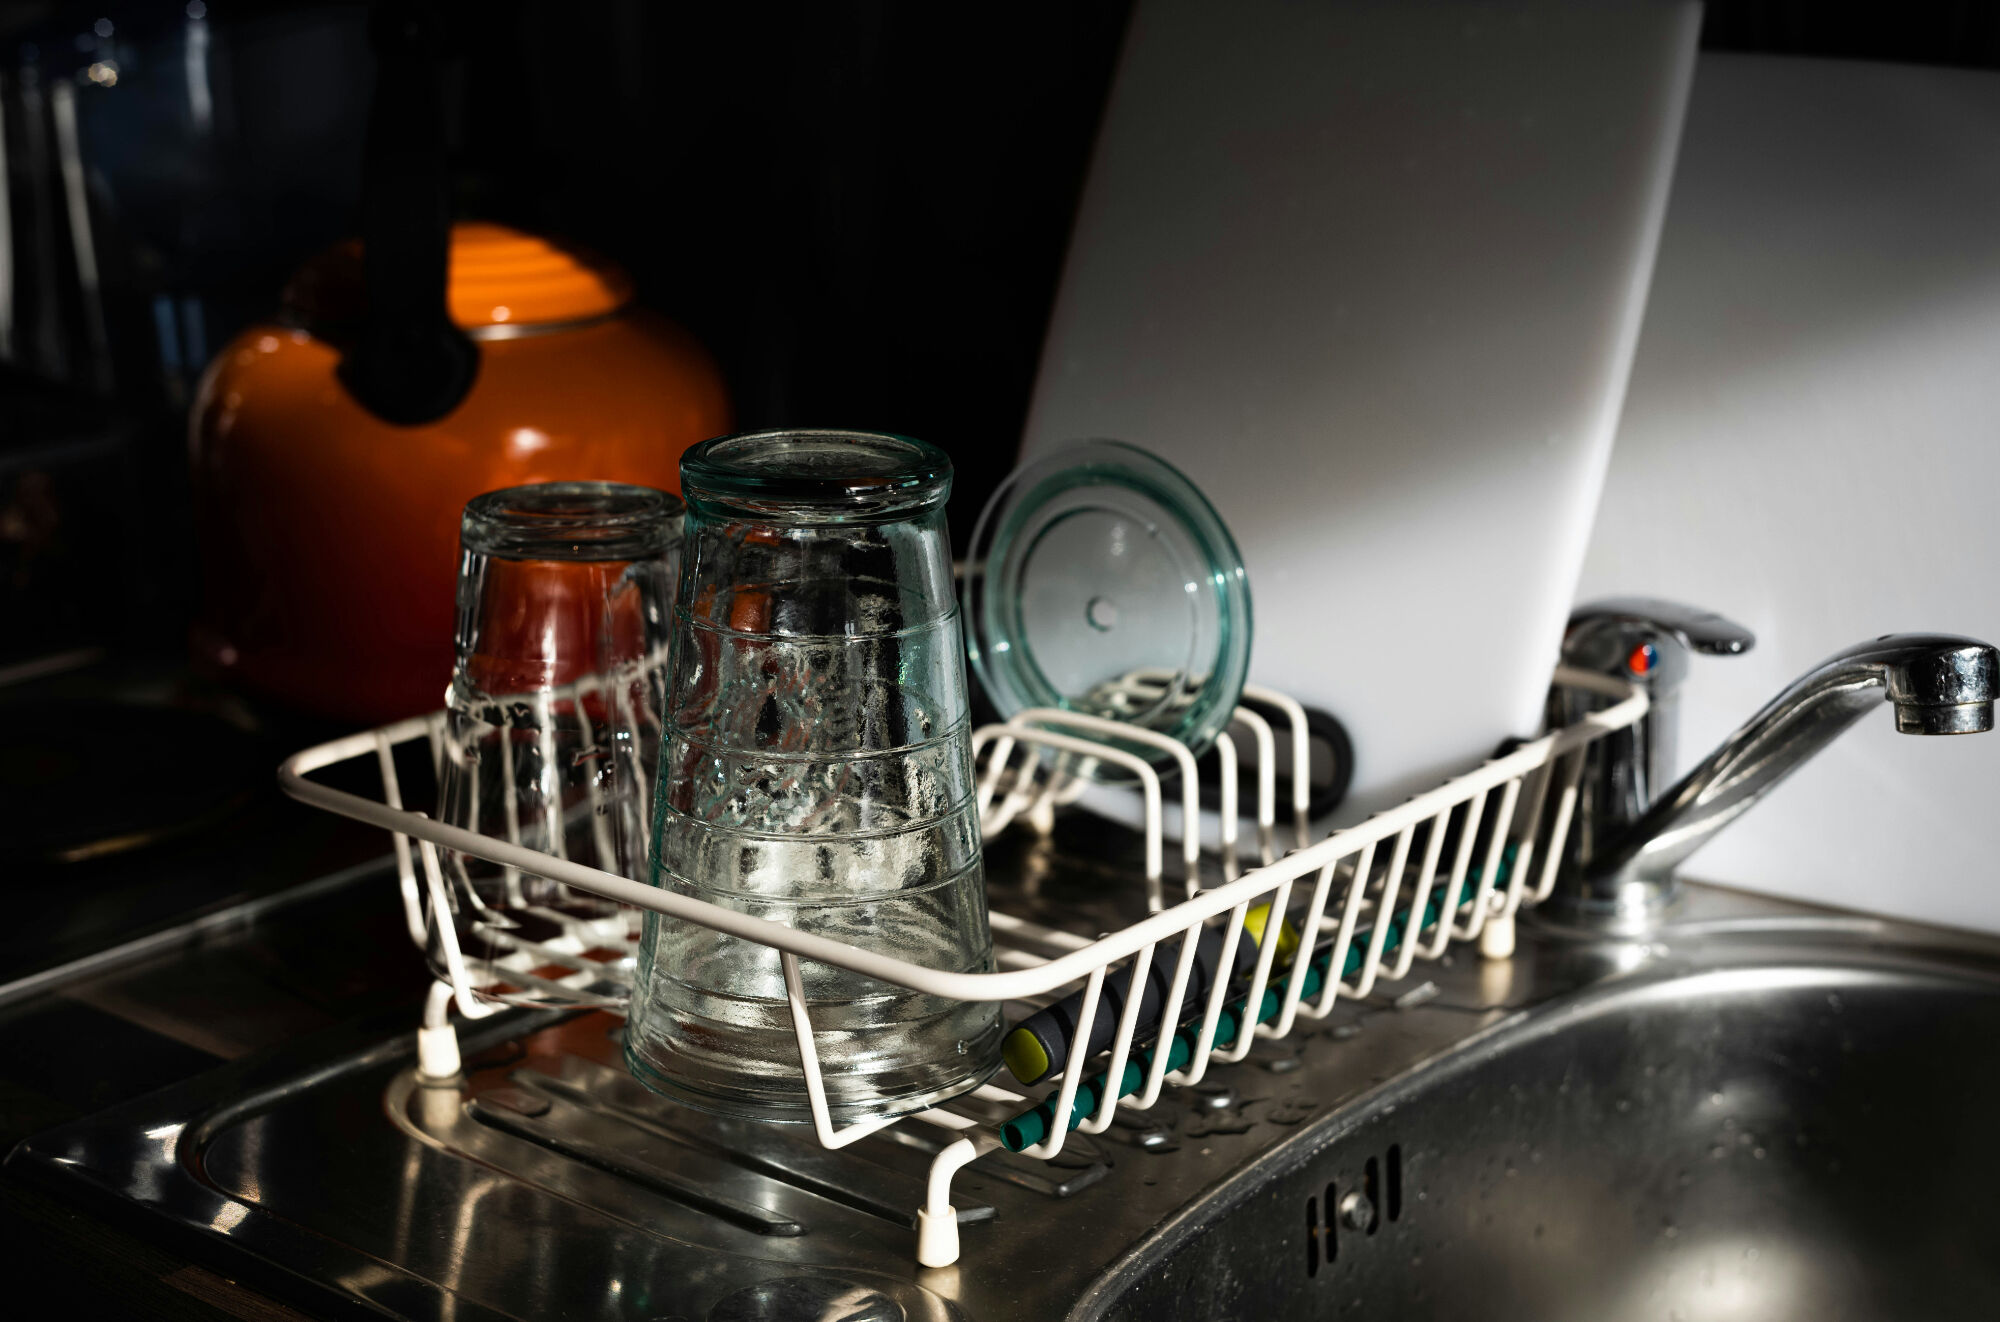 Features and Benefits of Smart Kitchen Equipment Dishwasher